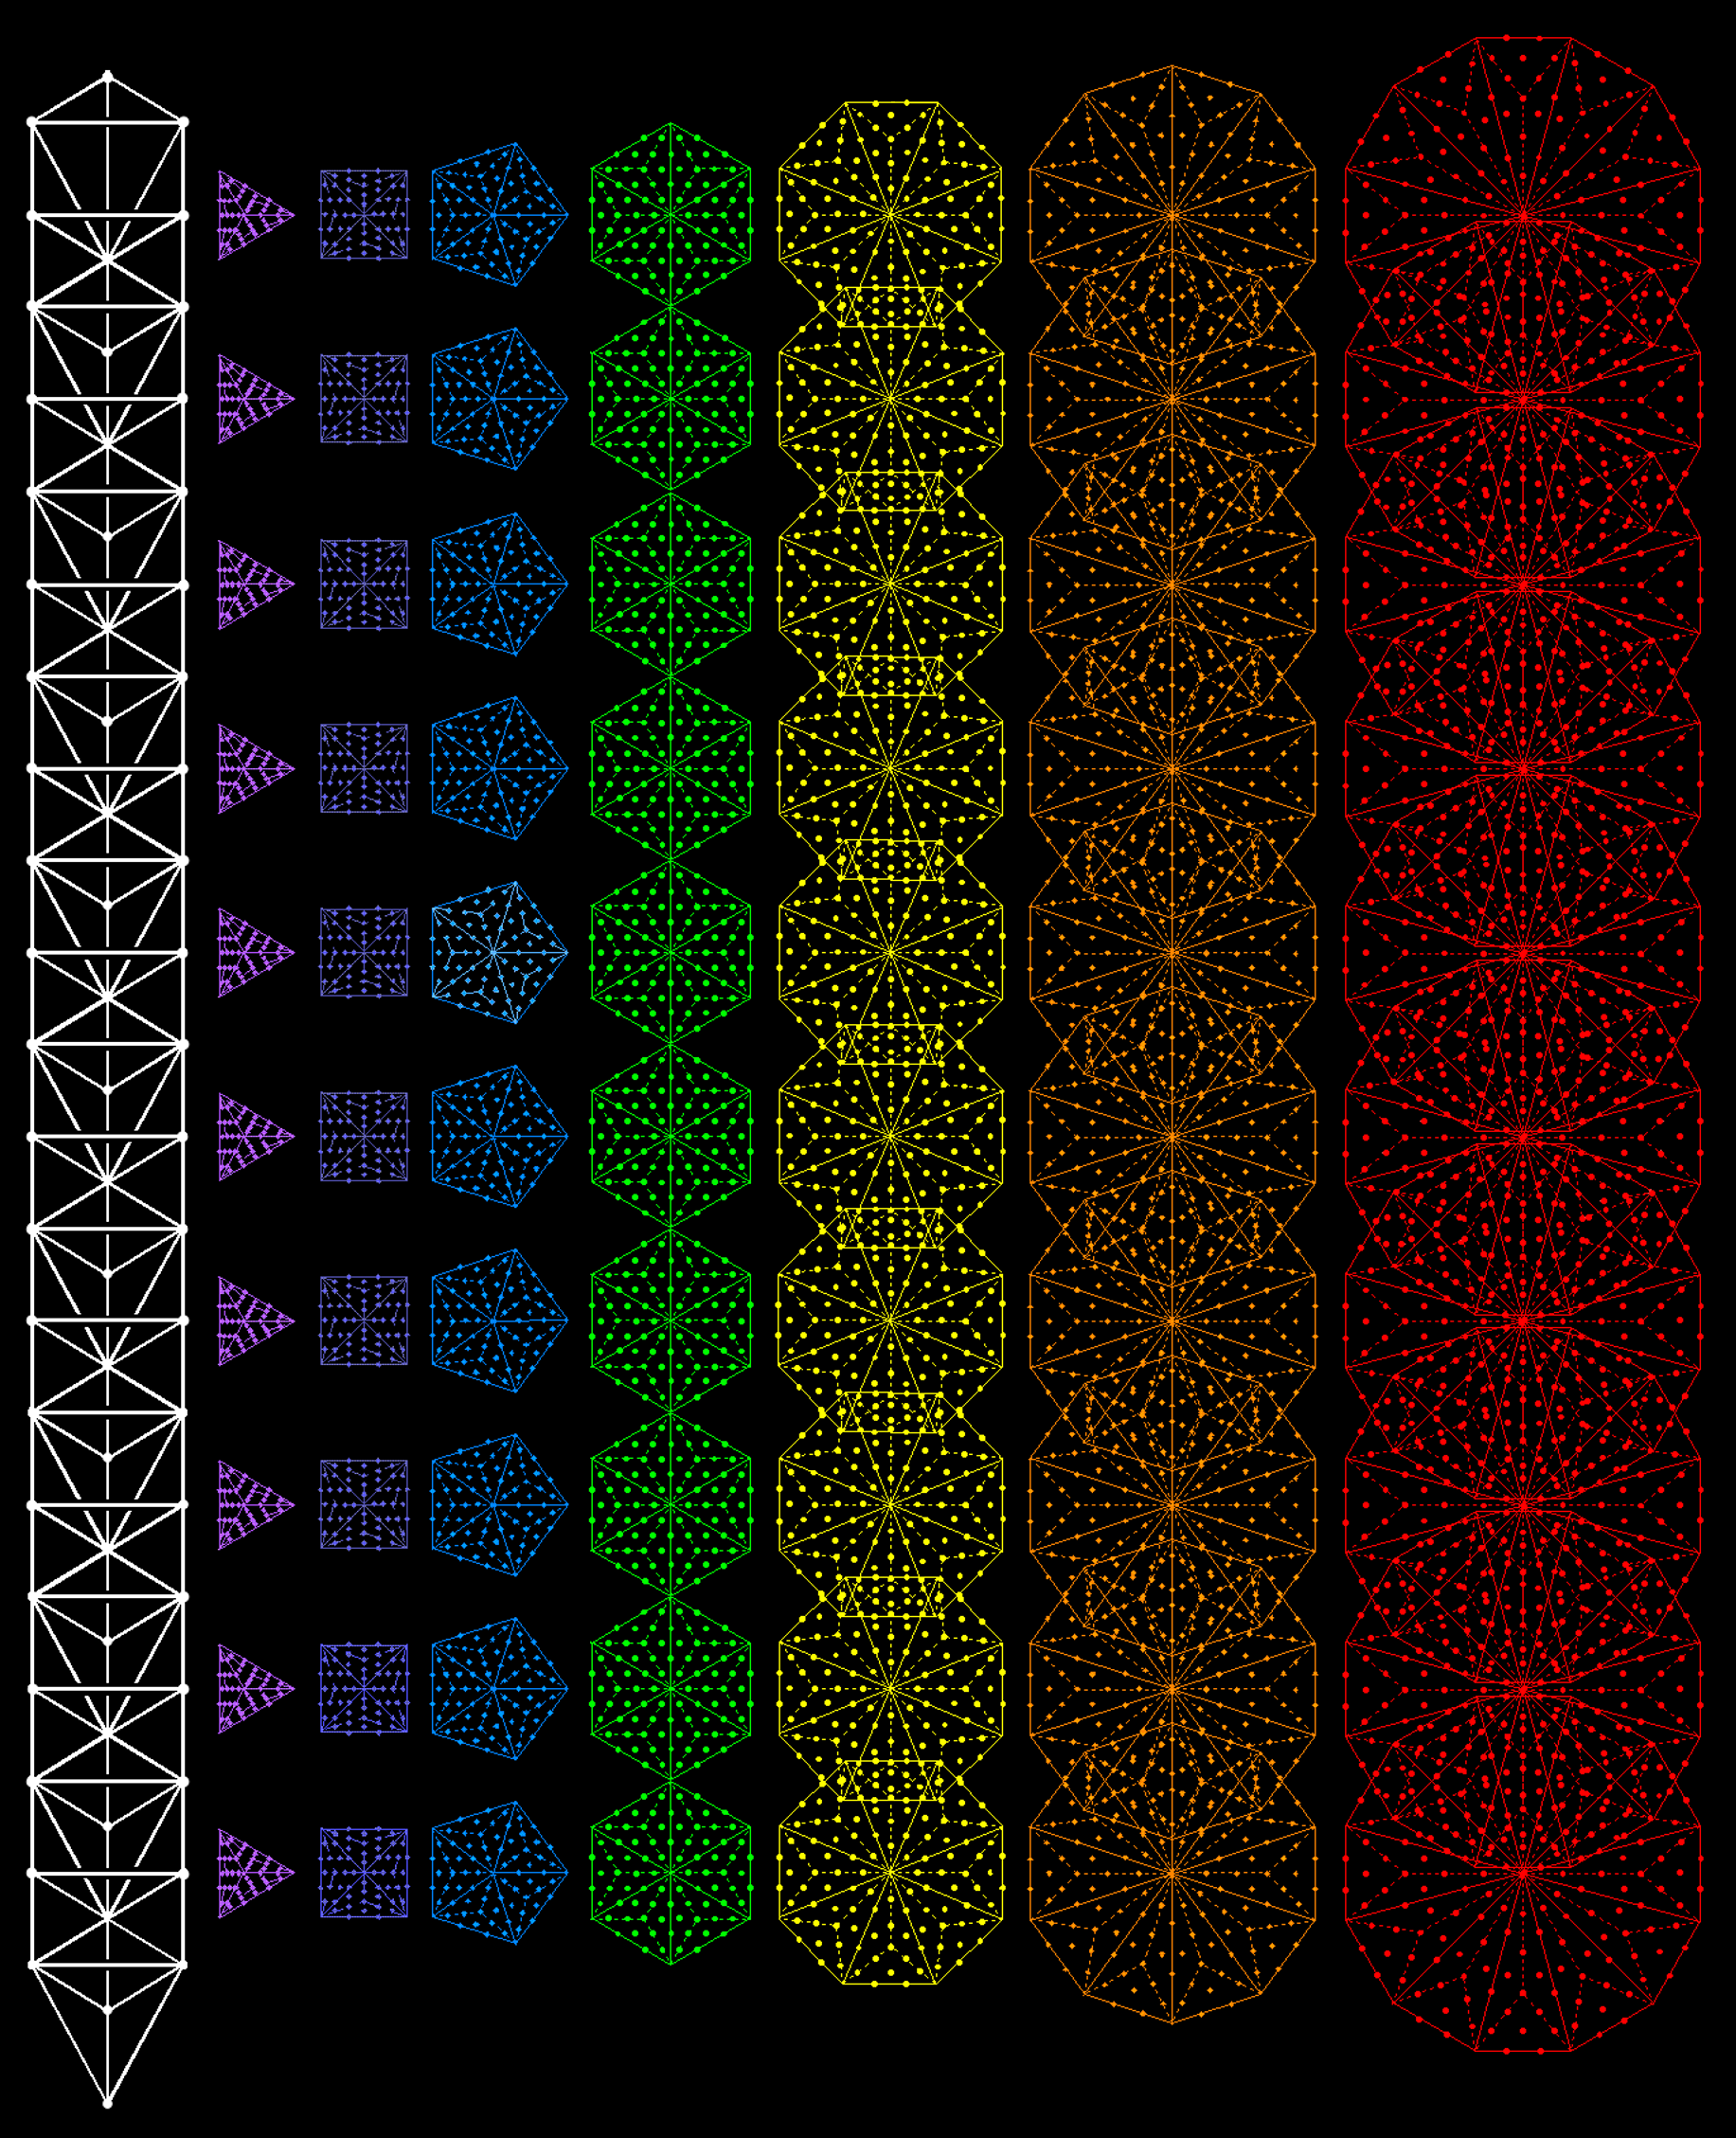 6720 yods in 70 separate Type B polygons other than corners of sectors